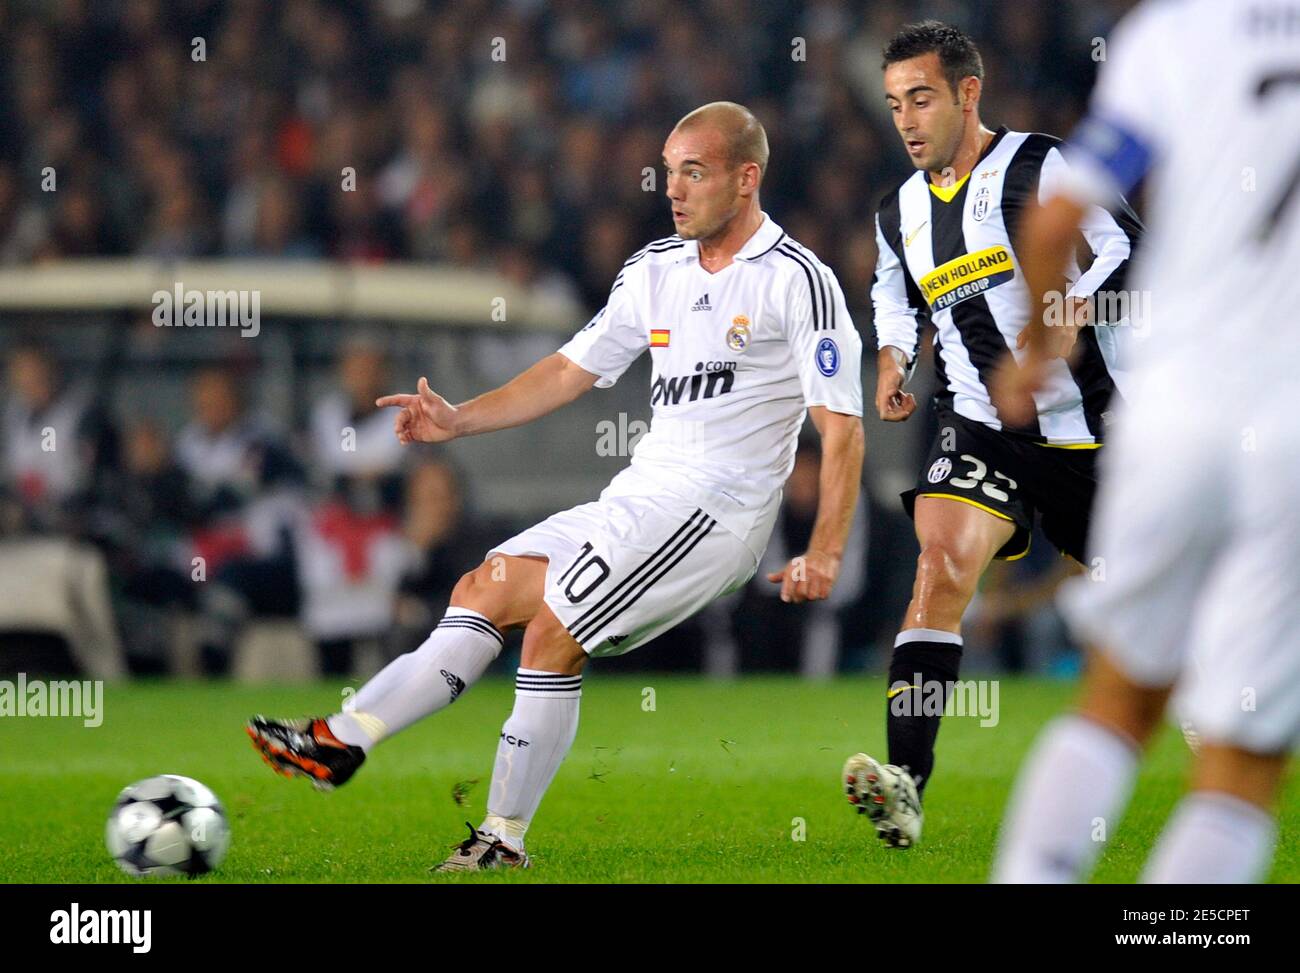 Juventus' Marco Marchionni and Real Madrid's Wesley Sneijder during the Champions League soccer match, Juventus FC vs Real Madrid CF at the Olympic stadium in Turin, Italy on October 21, 2008. Juventus won 2-1. Photo by Stephane Reix/ABACAPRESS.COM Stock Photo